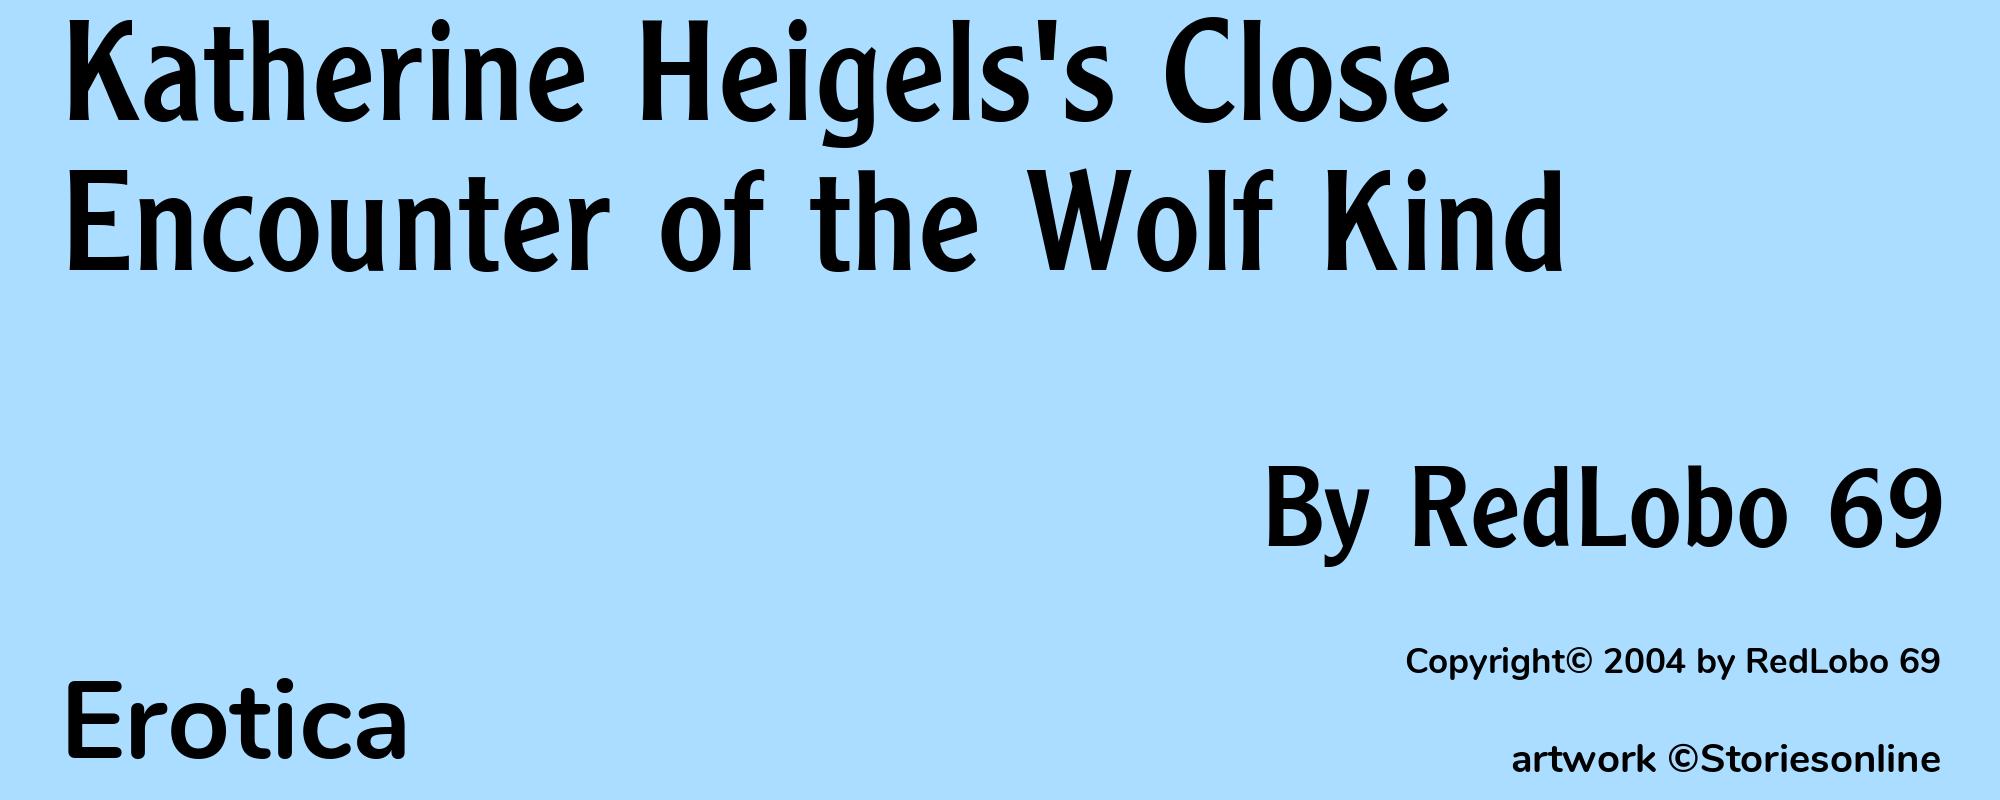 Katherine Heigels's Close Encounter of the Wolf Kind - Cover